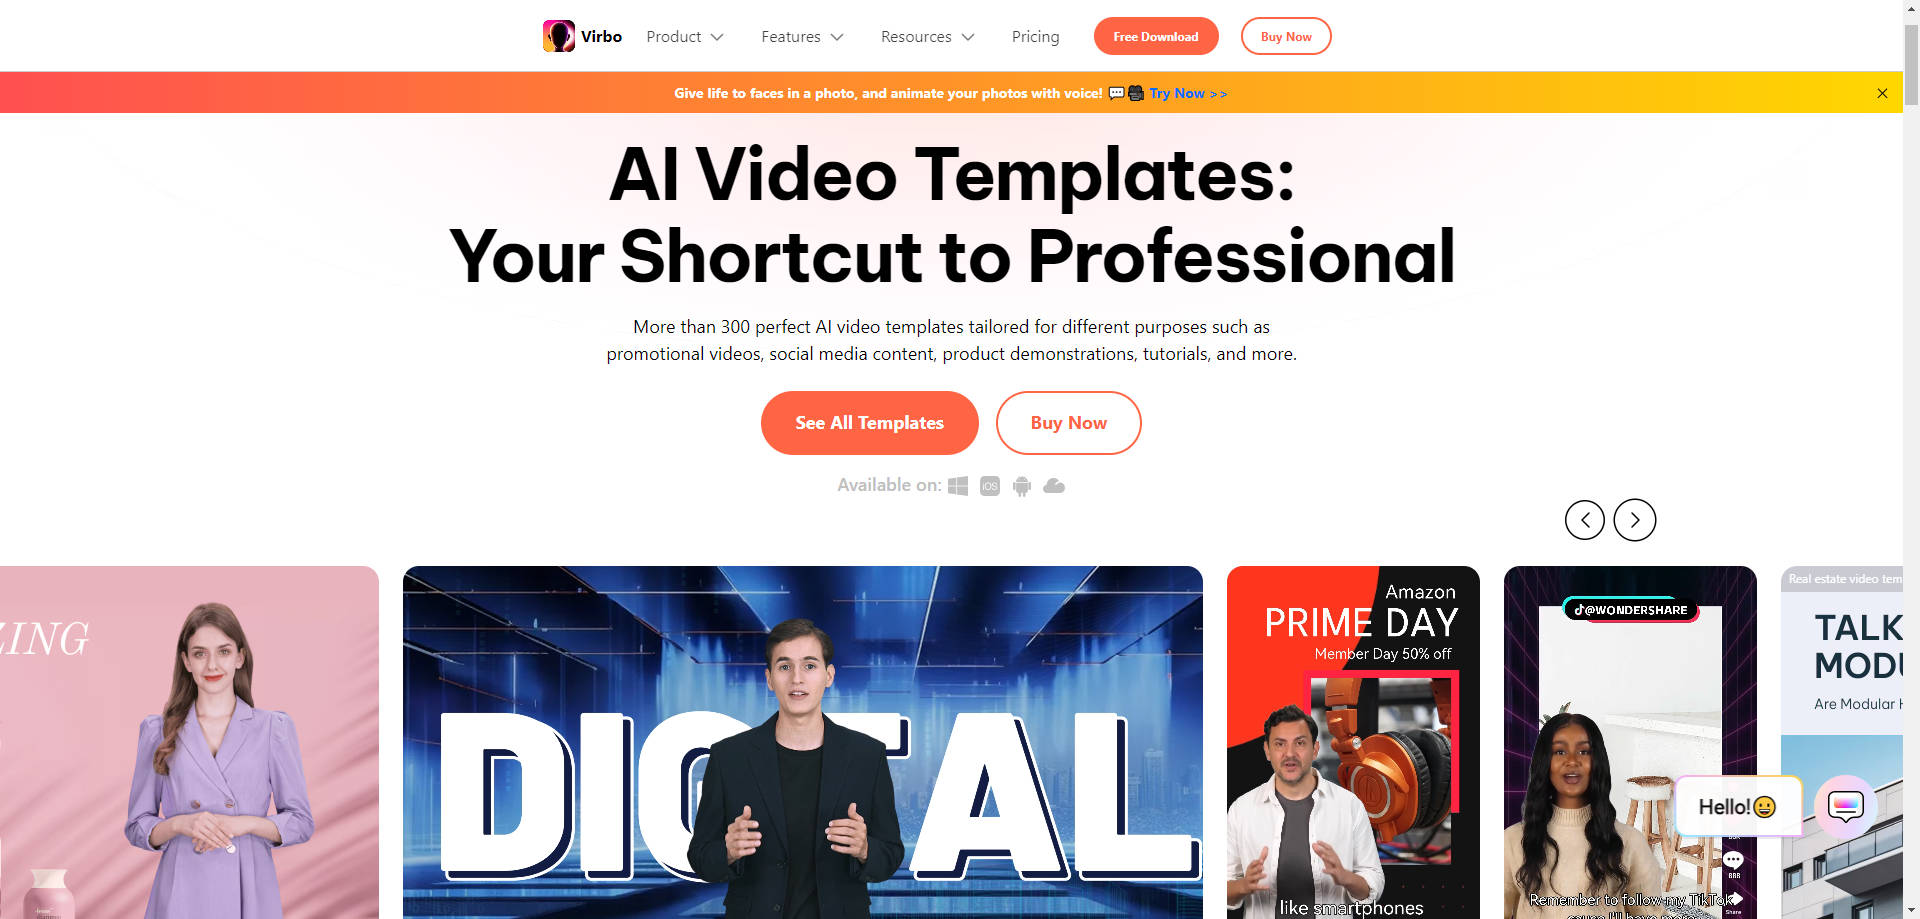 ai video templates of virbo